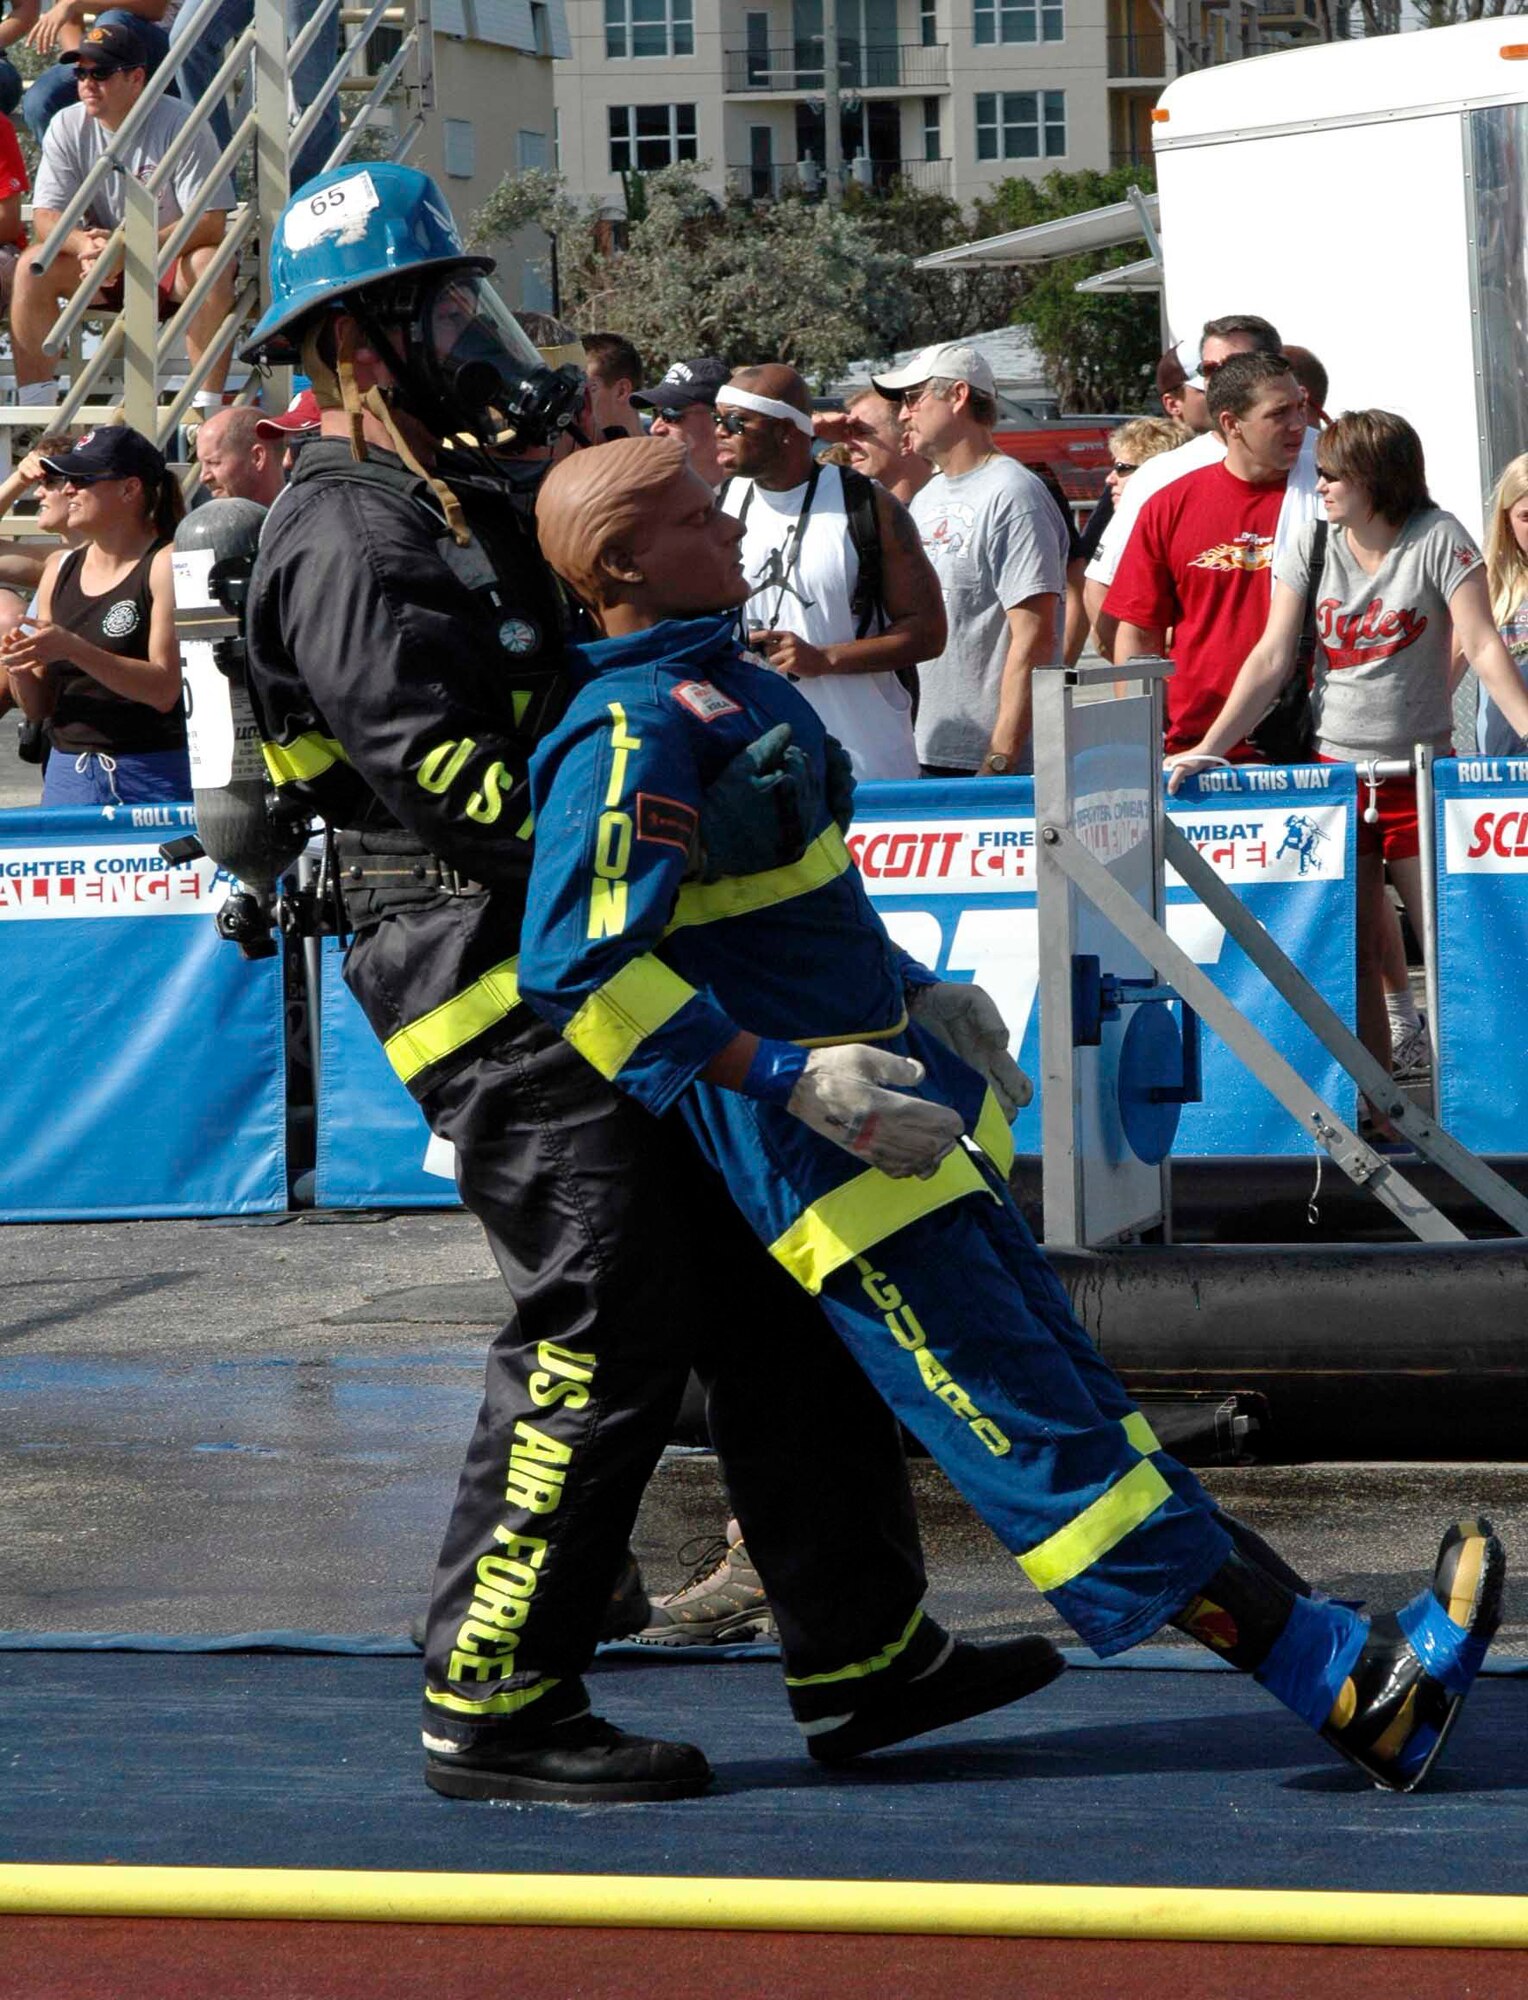 DEERFIELD BEACH, Fla. (AFPN) -- Staff Sgt. Harry Myers competes in the victim rescue on the second day of the World Firefighter Combat Challenge. The team of firefighters from Travis Air Force Base, Calif., is trying to retain its title as world champions. Sergeant Myers is a firefighter assigned to the 60th Civil Engineer Squadron. (U.S. Air Force photo by Staff Sgt. Matthew McGovern)